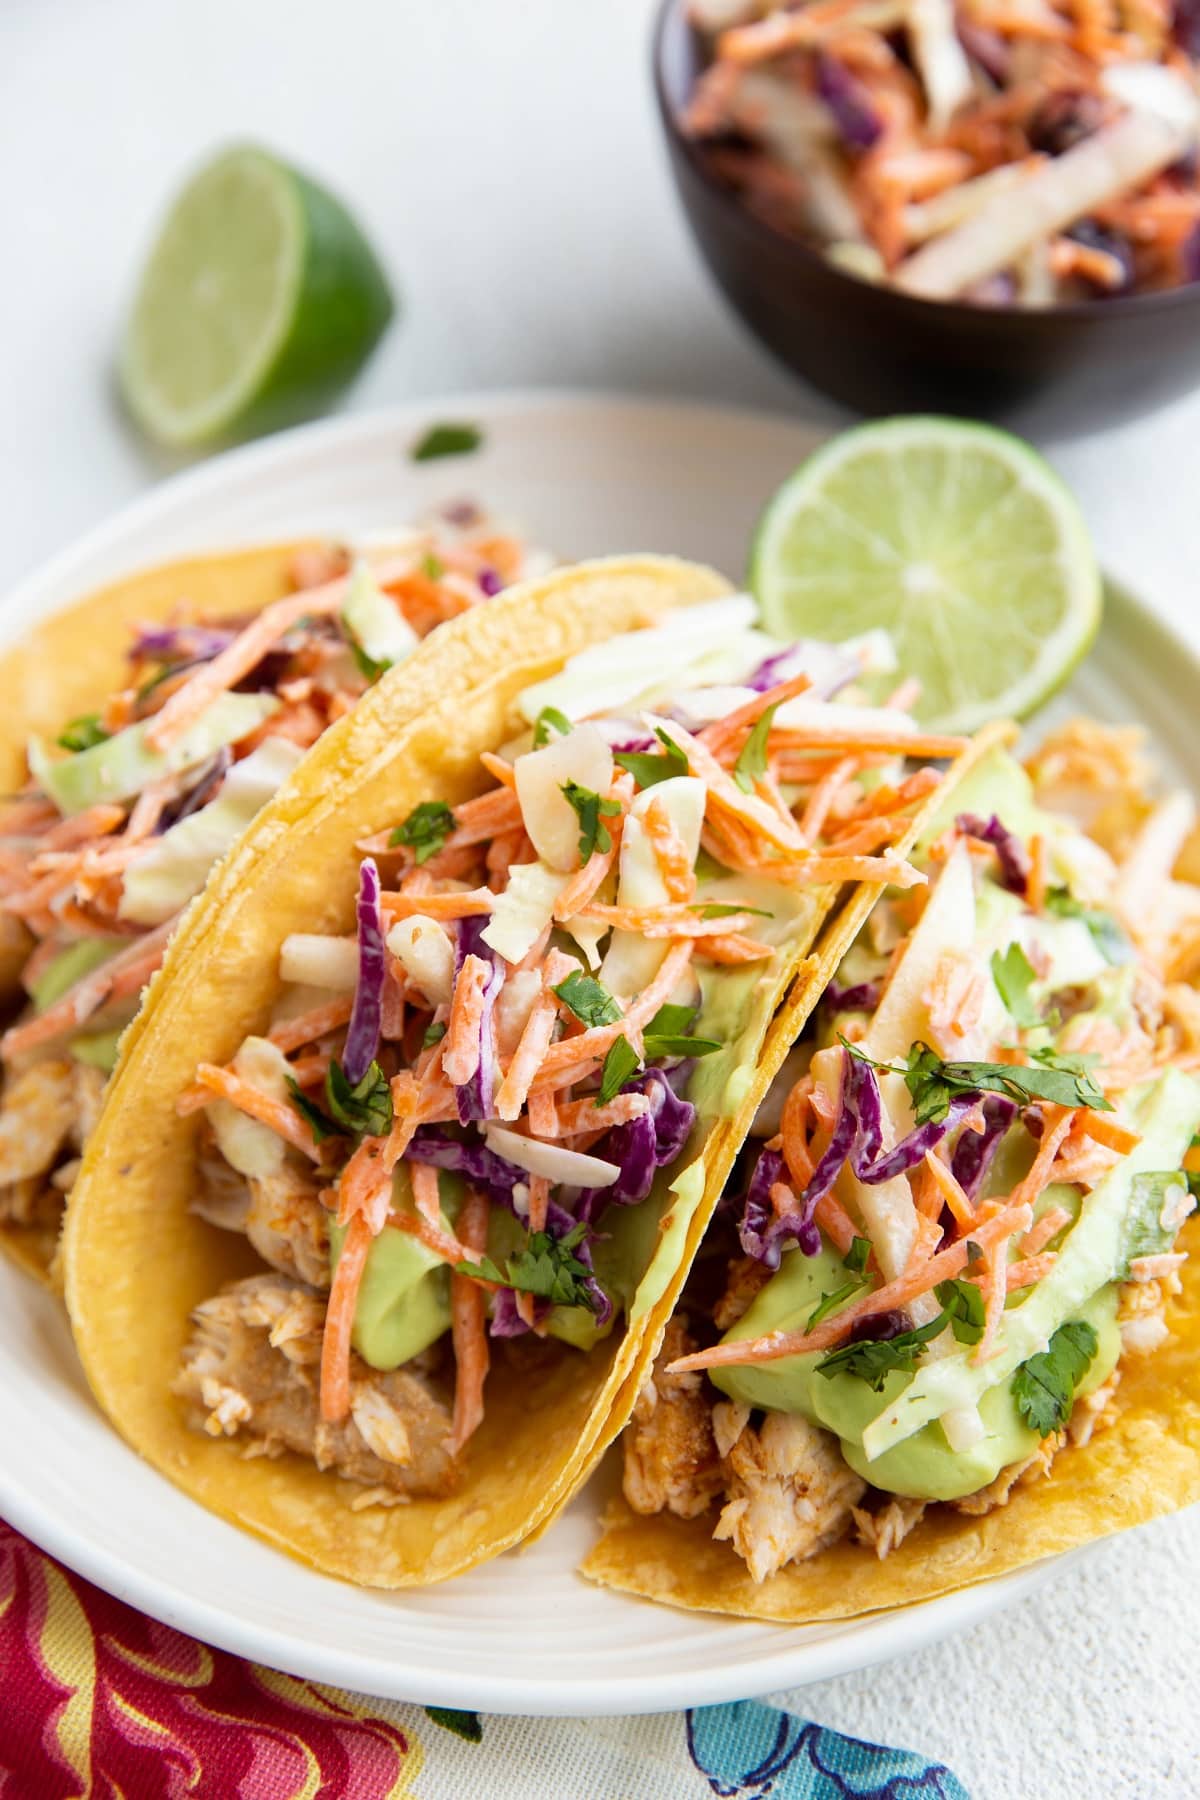 Three fish tacos on a plate with slaw in the background.